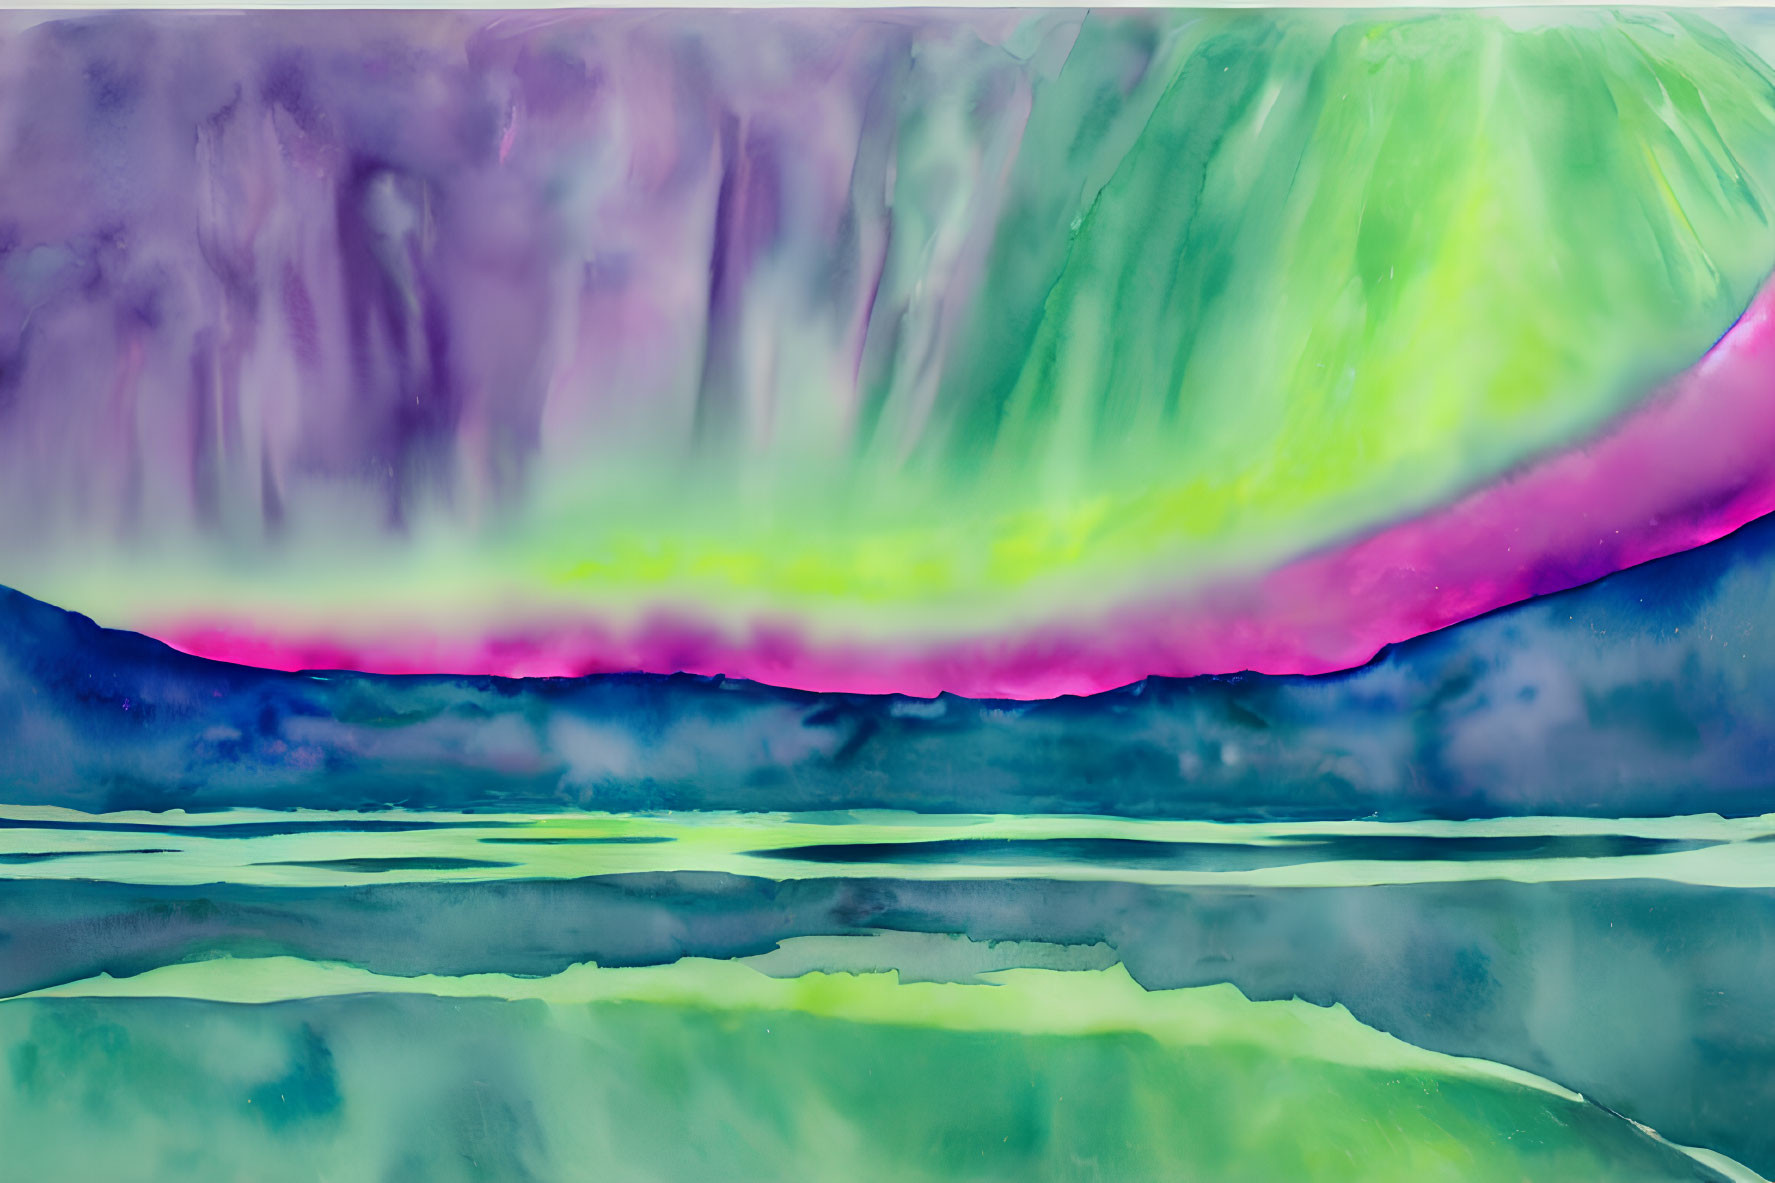 Multicolored Abstract Painting with Flowing Patterns of Purple, Green, Pink, and Blue